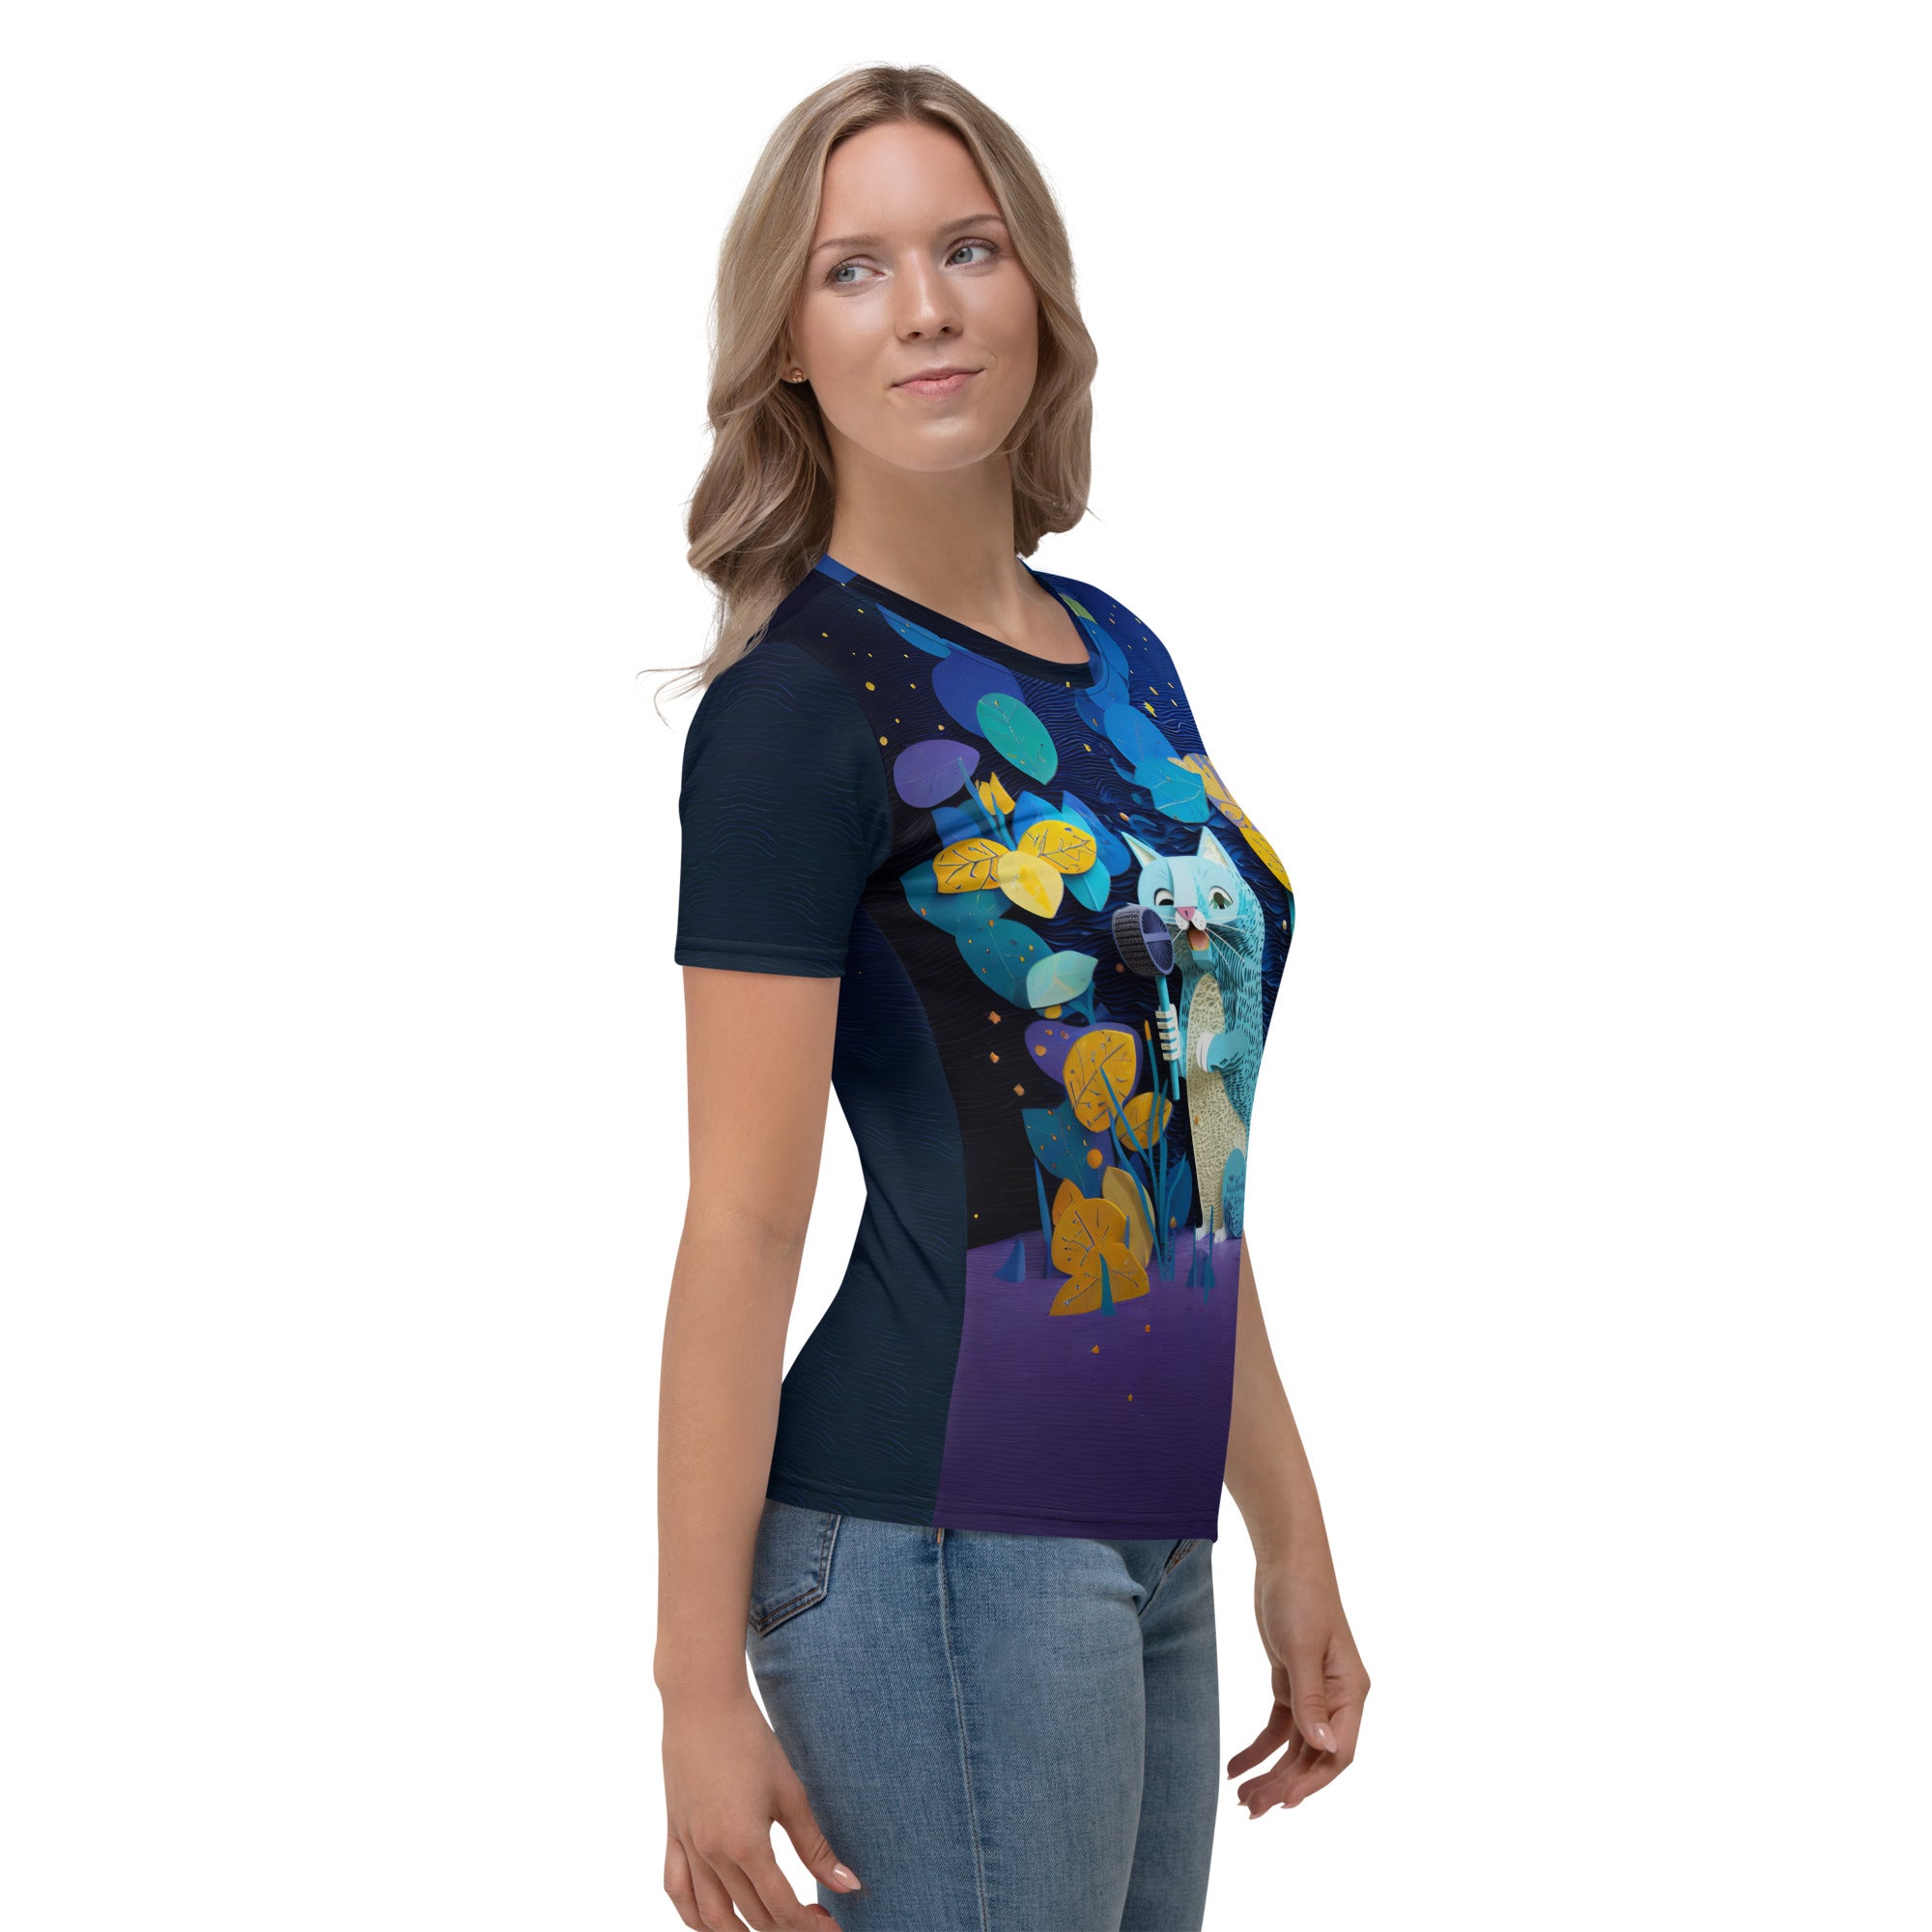 Women's crew neck t-shirt with comet tail design.